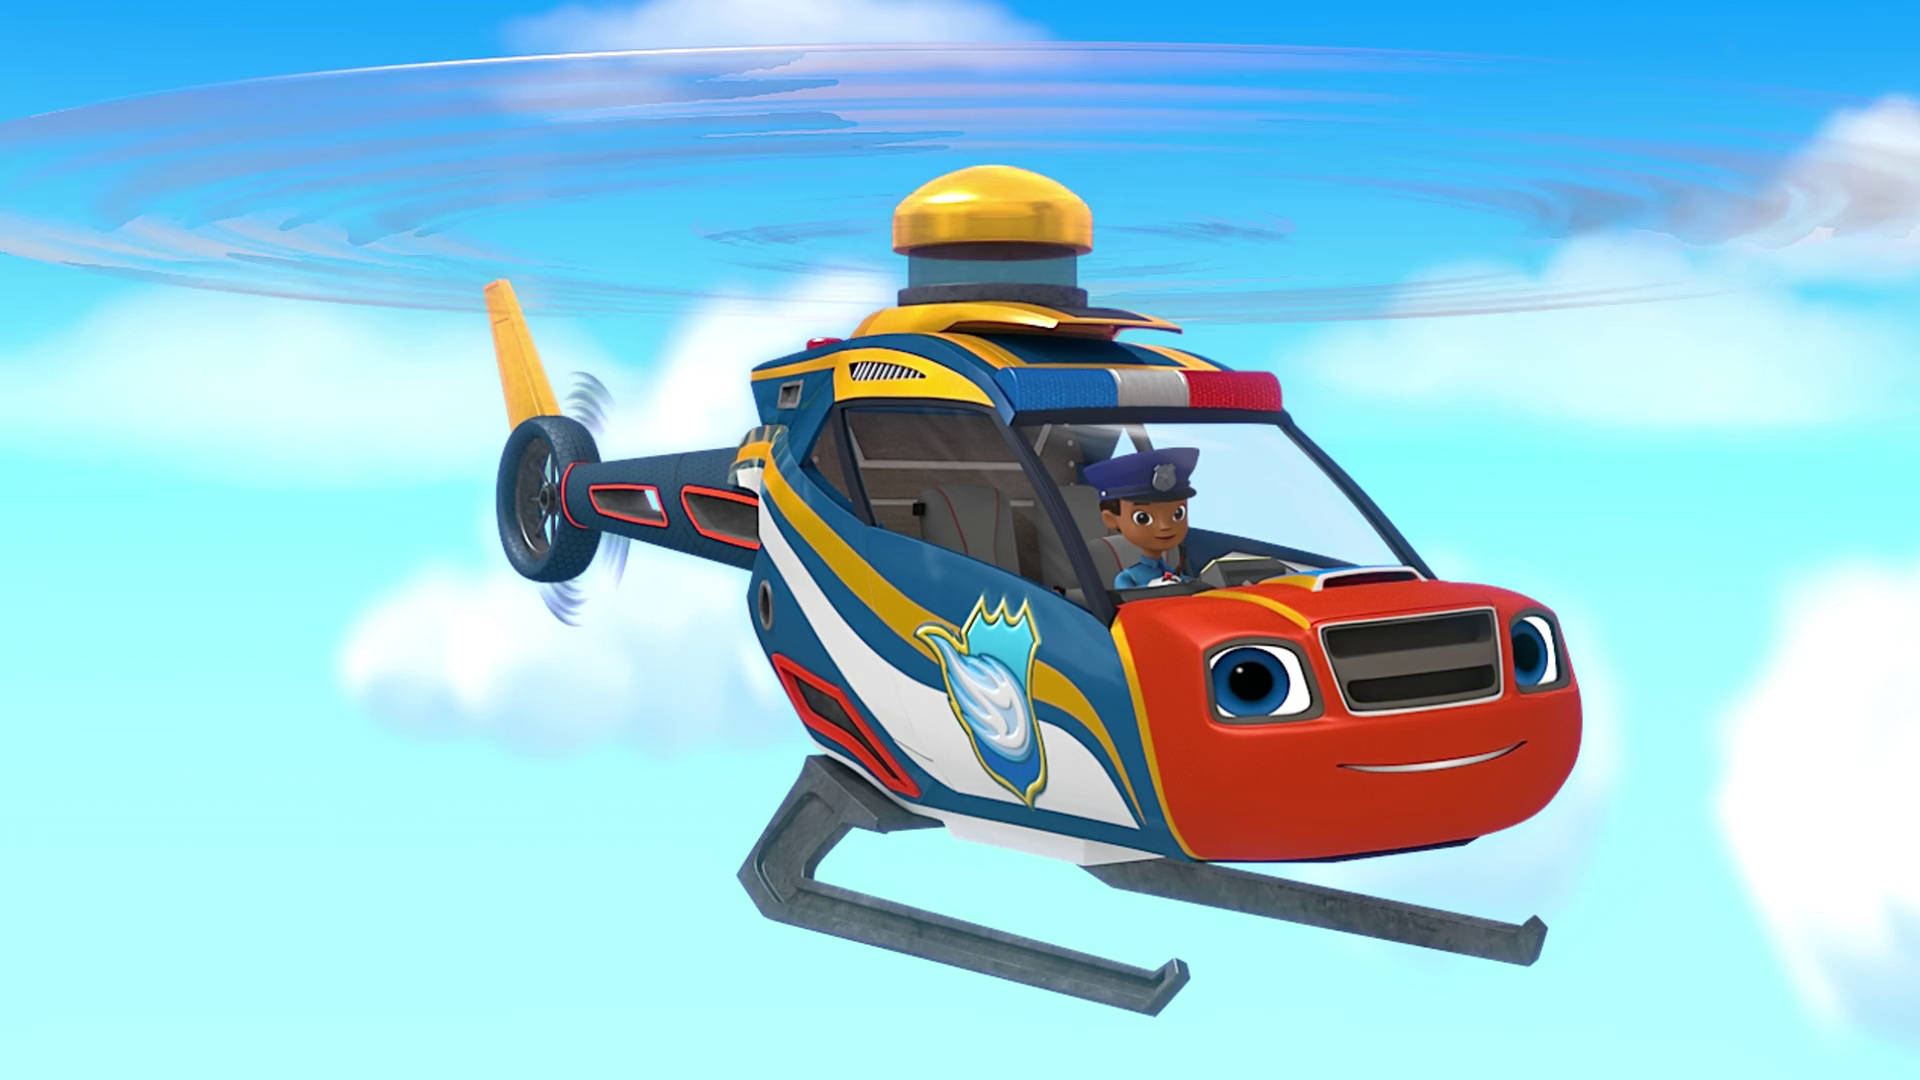 Blaze And The Monster Machines Helicopter Wallpaper